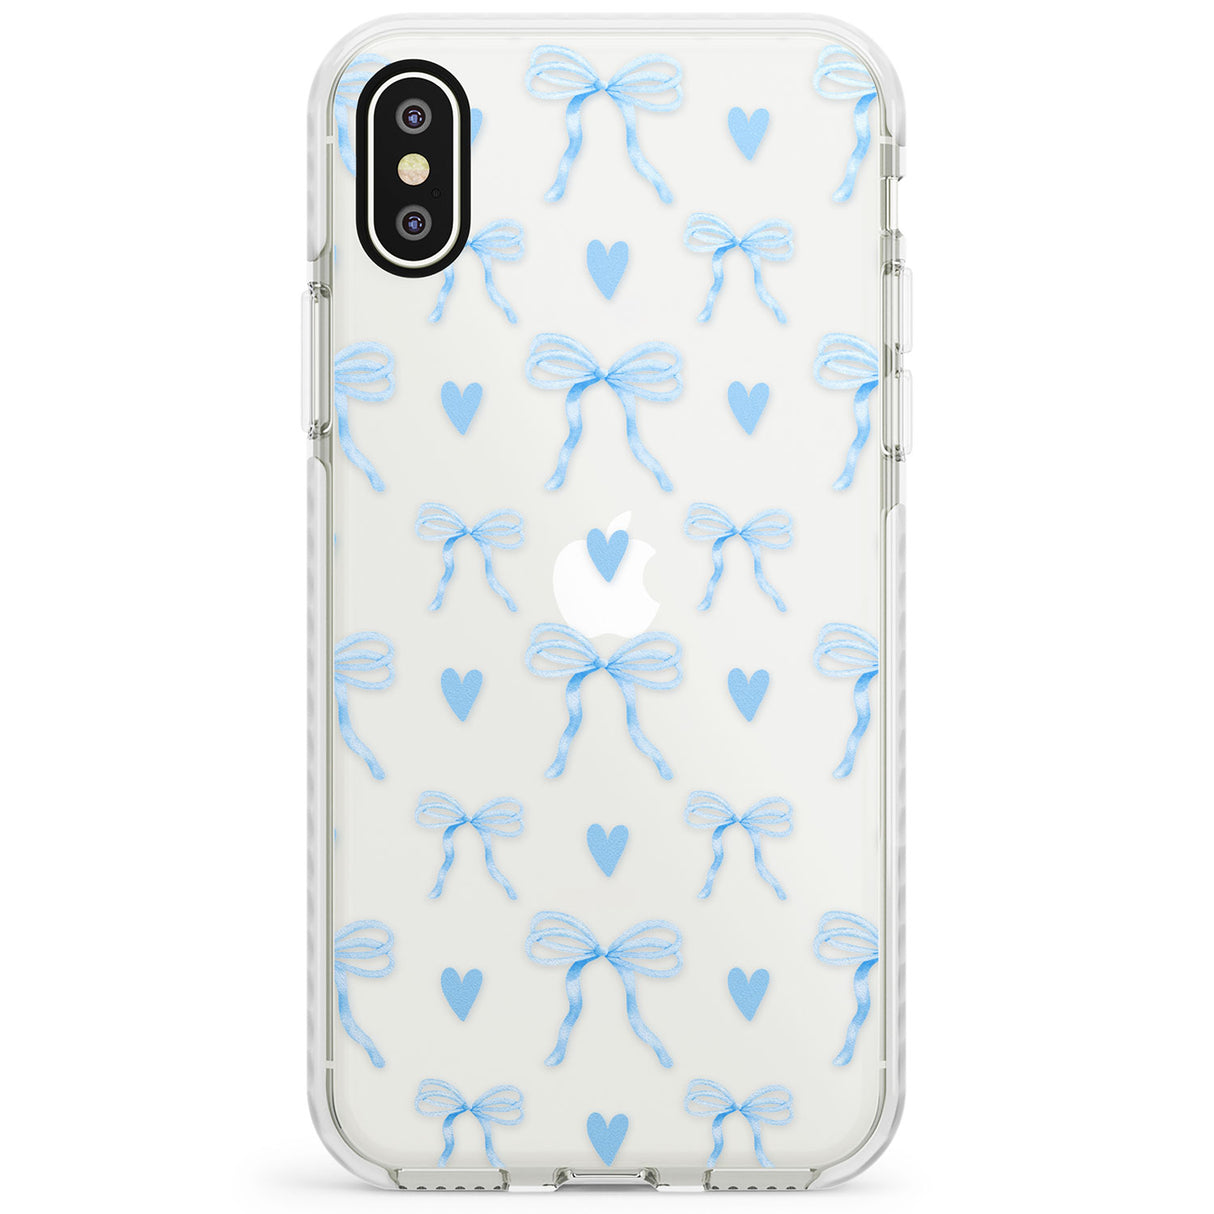 Blue Bows & Hearts Impact Phone Case for iPhone X XS Max XR